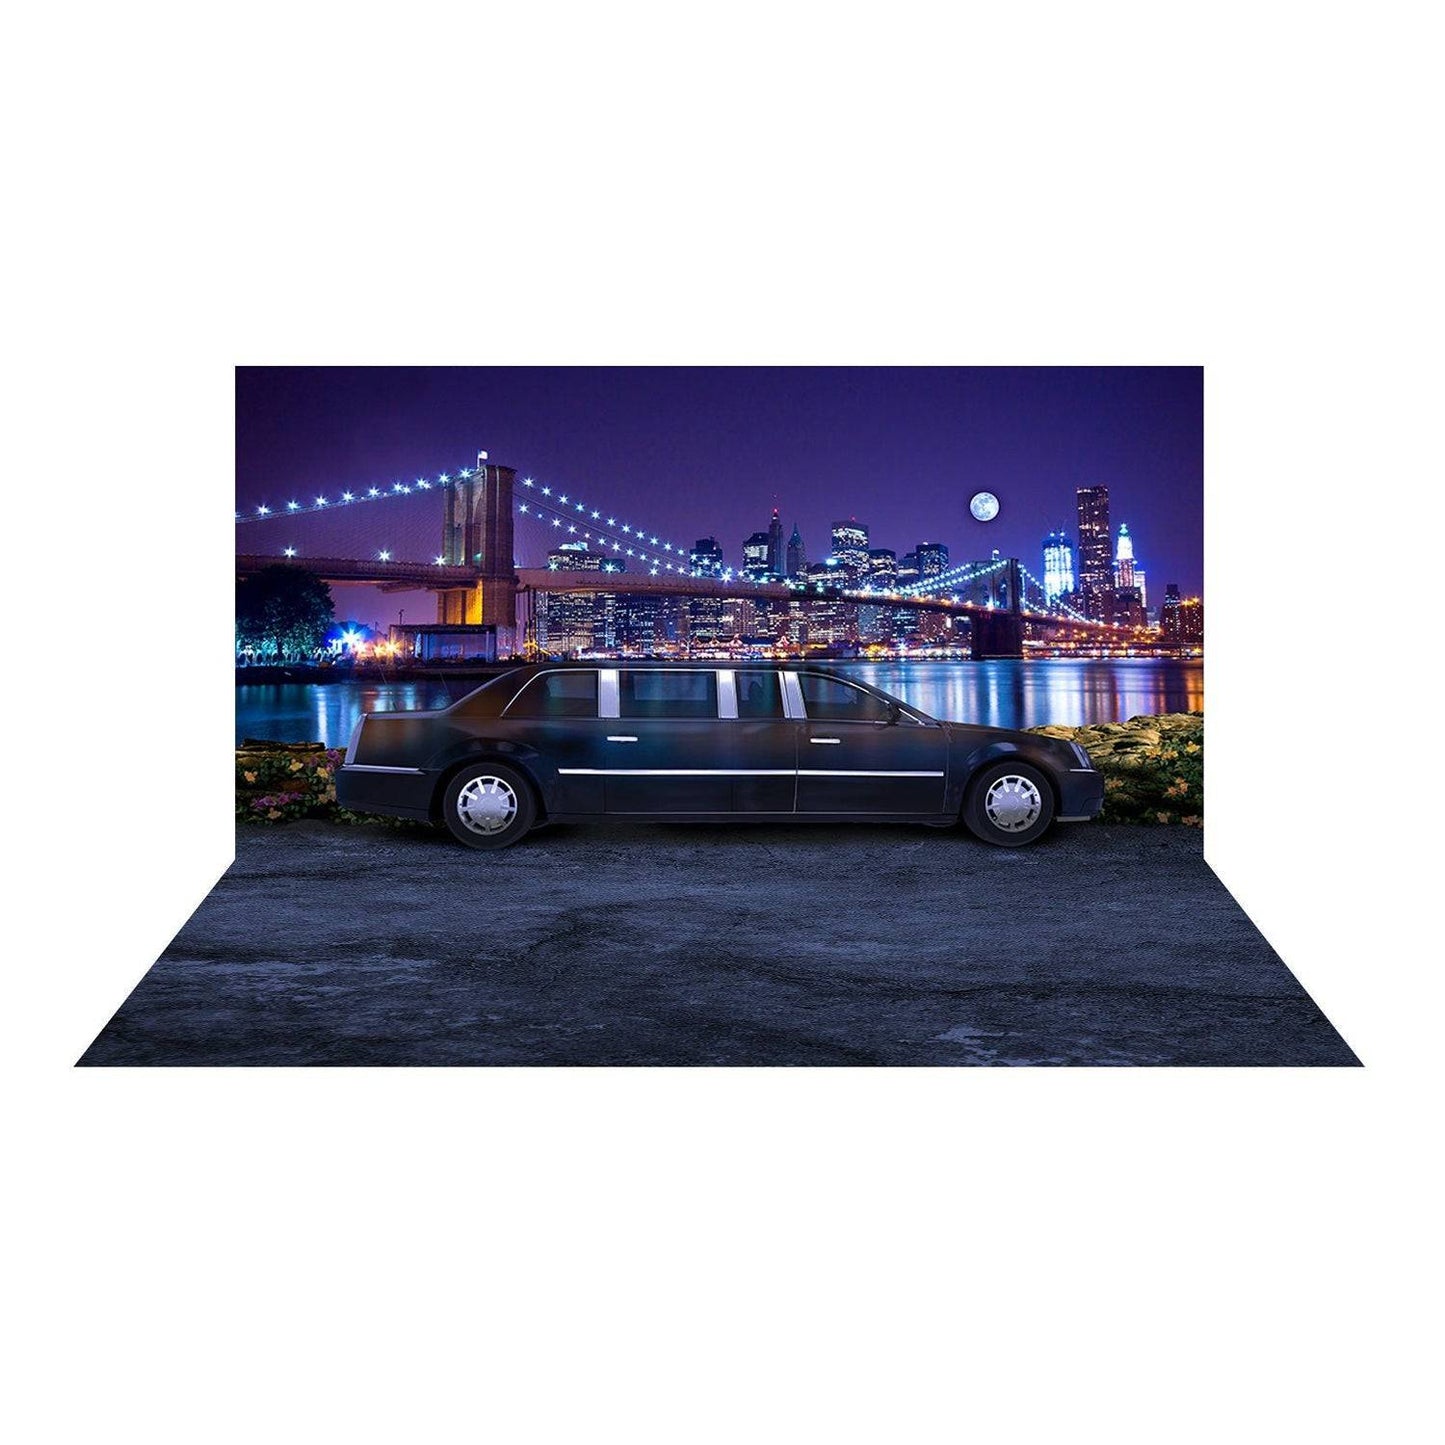 New York Limousine Party Photography Background - Basic 16  x 16  